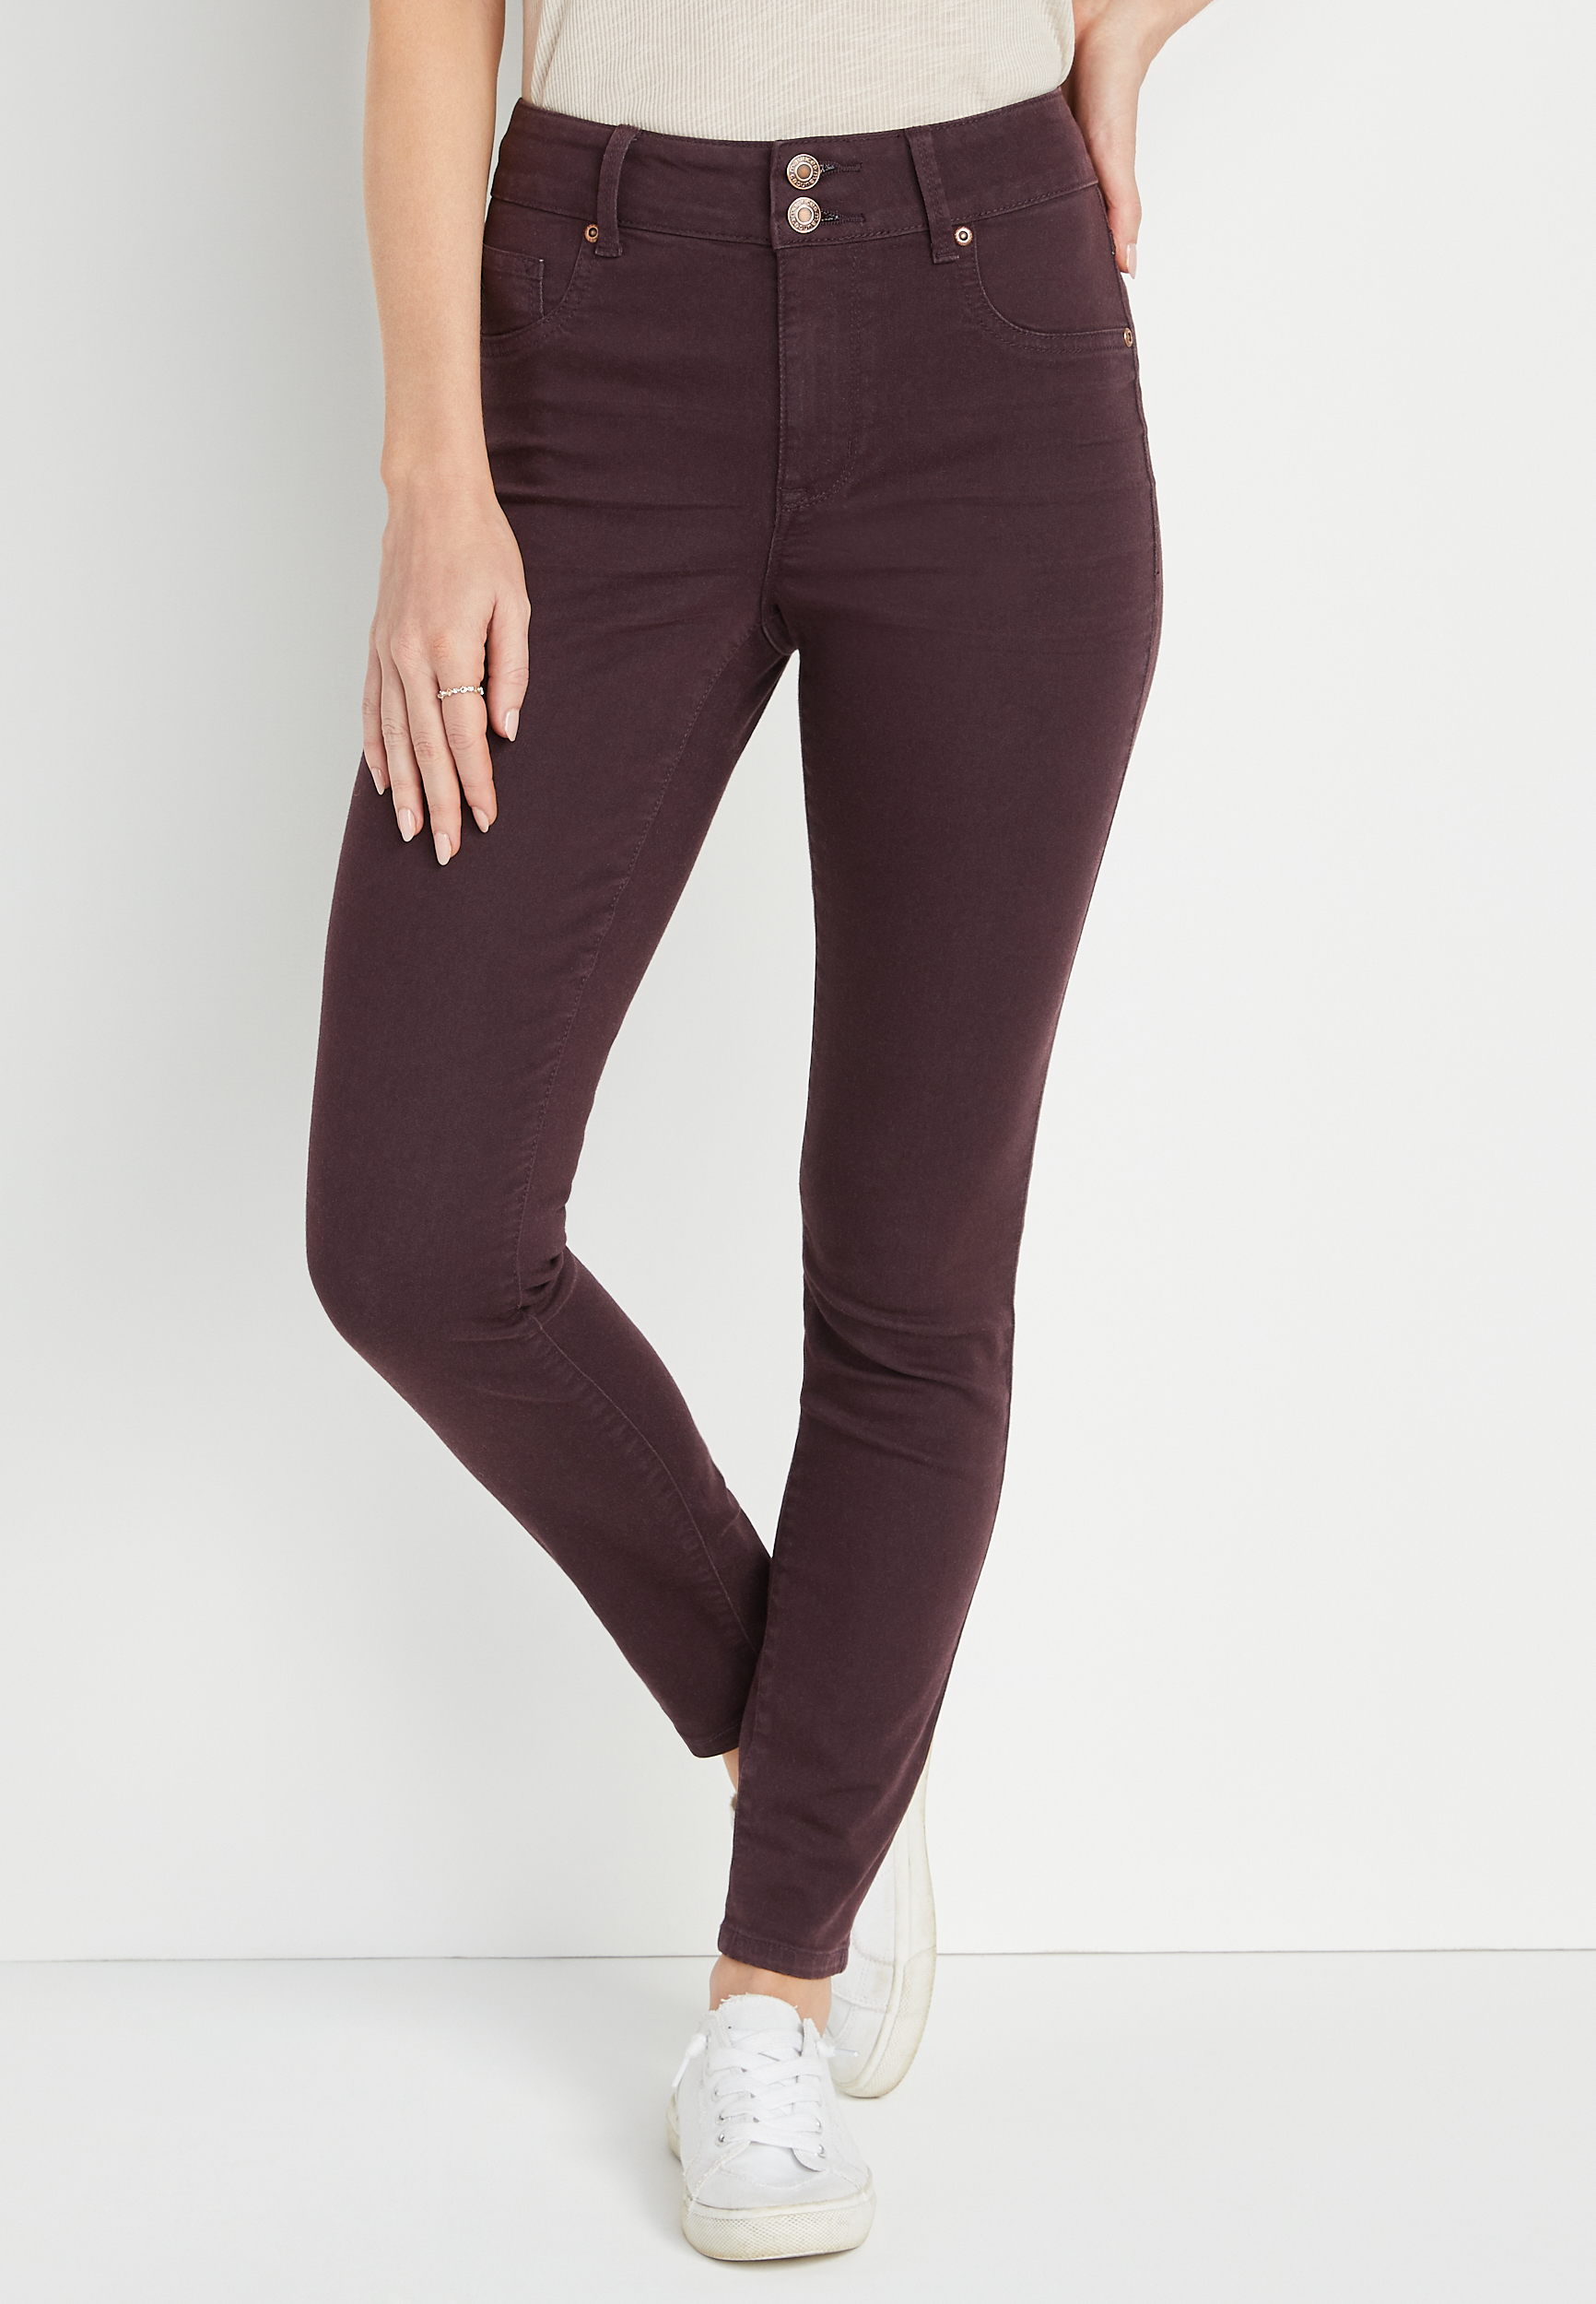 m jeans by mauricesâ¢ High Rise Maple Double Button Jegging Made With REPREVEÂ® | maurices